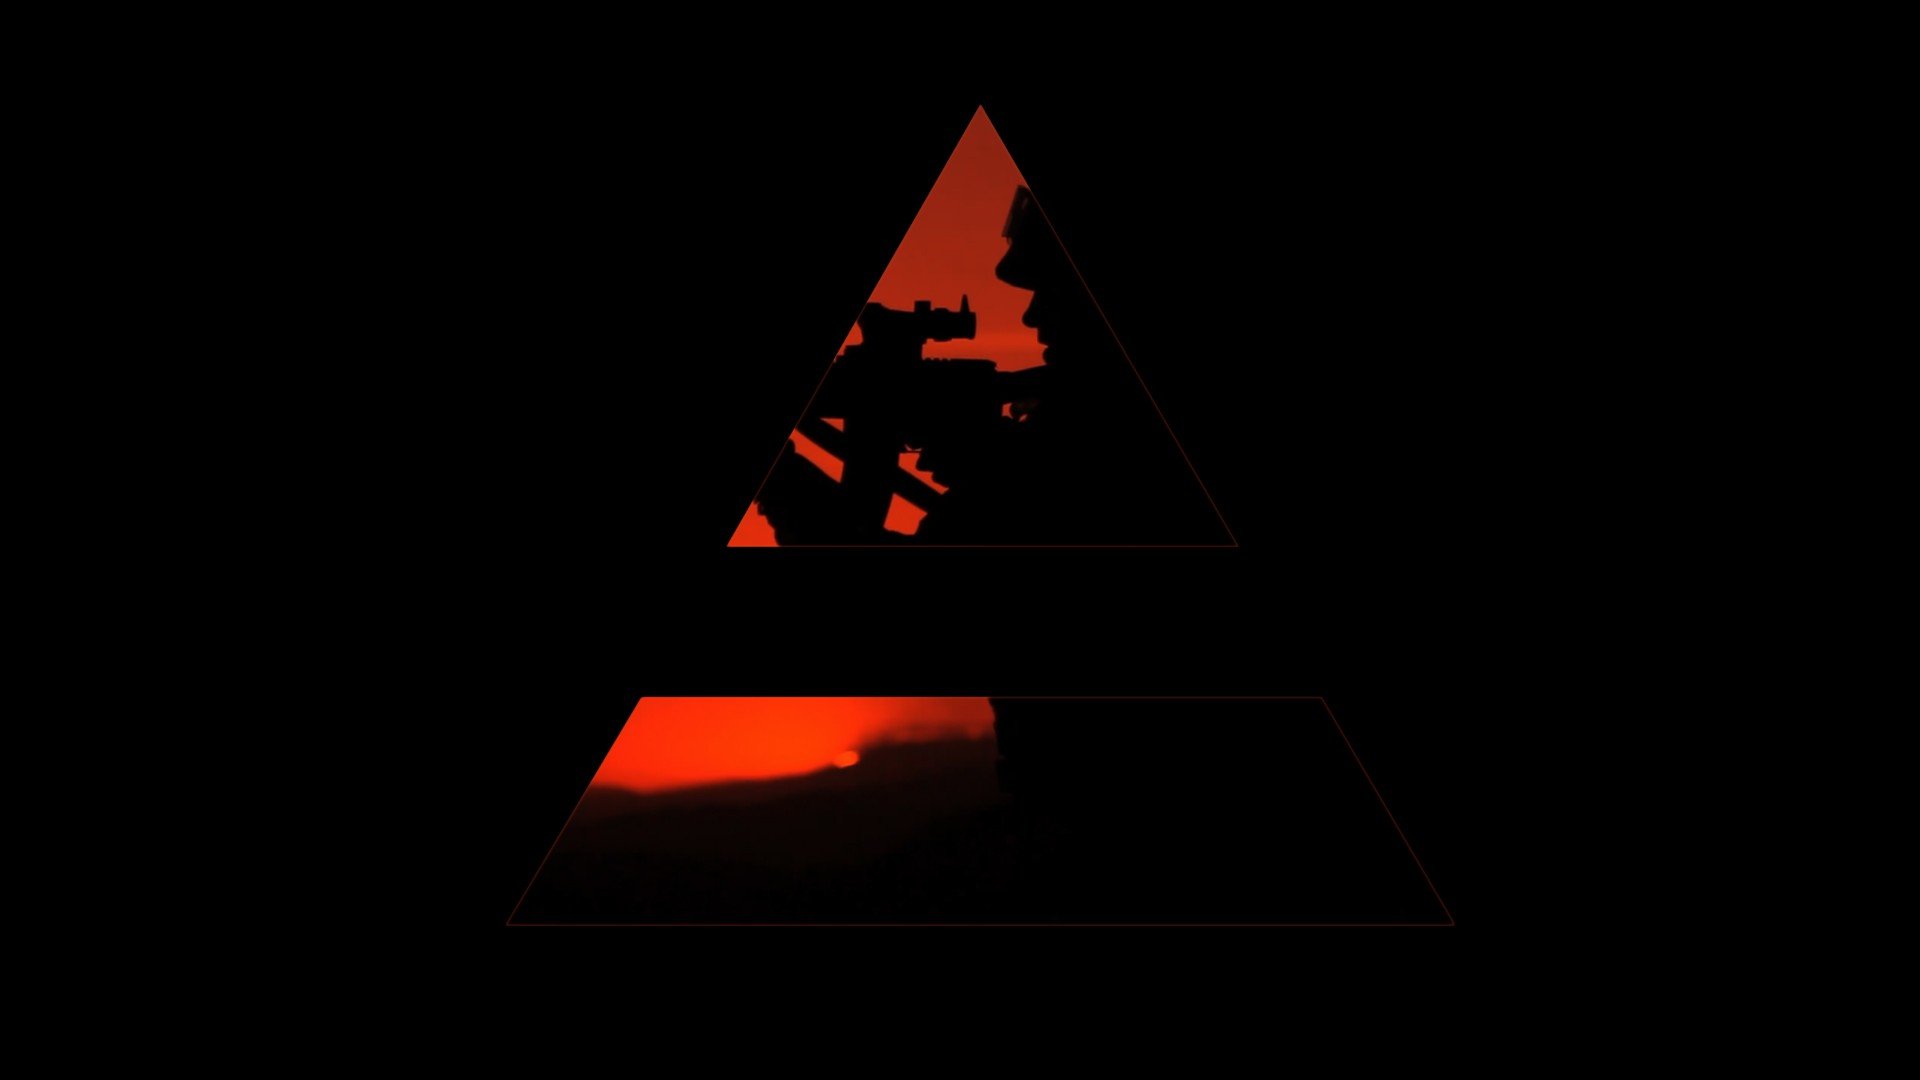 30 seconds to mars, Triangle, War, Band Wallpaper